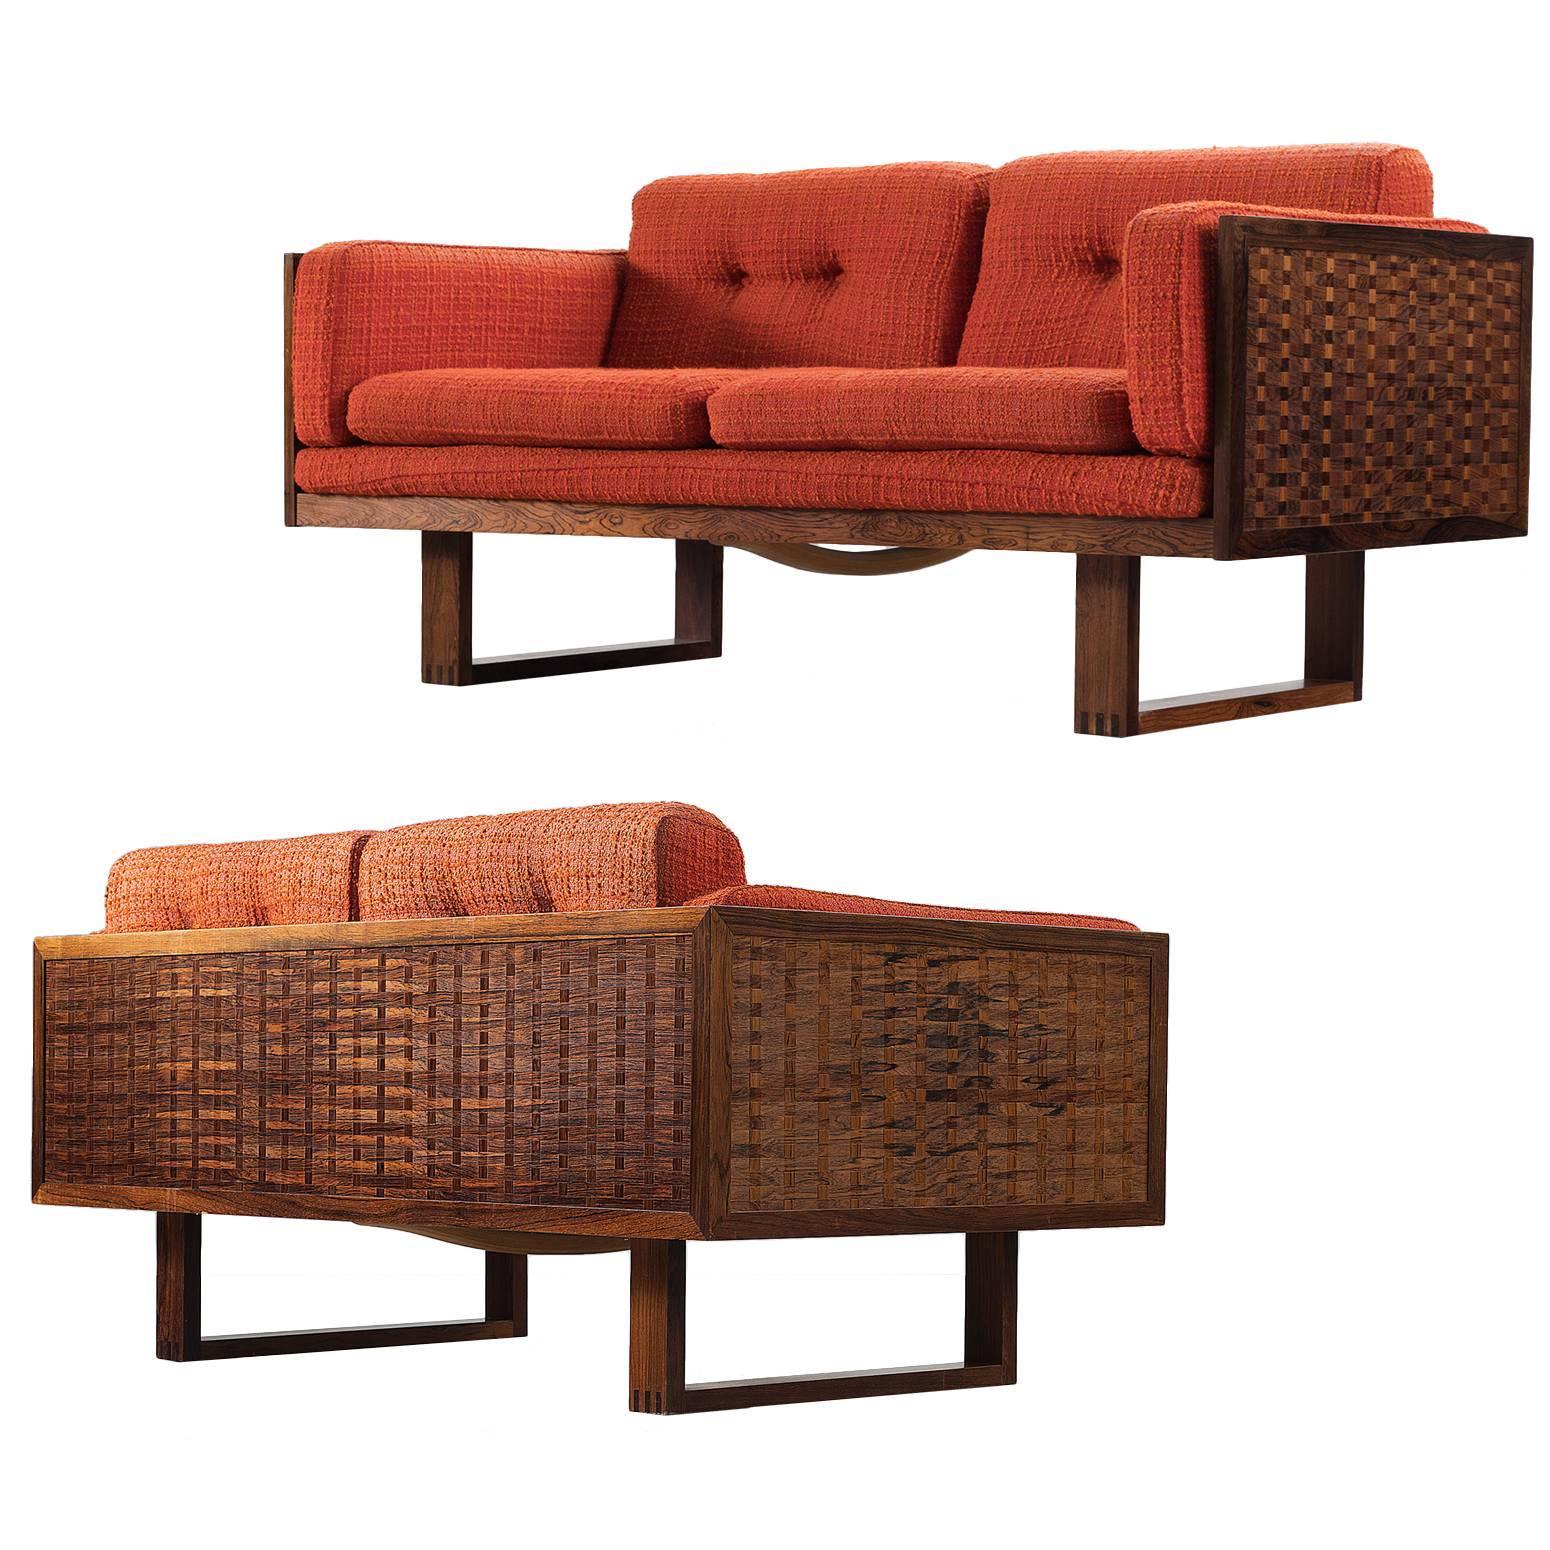 Paul Cadovius Set of Two Small Rosewood Sofa's in Orange Fabric Upholstery